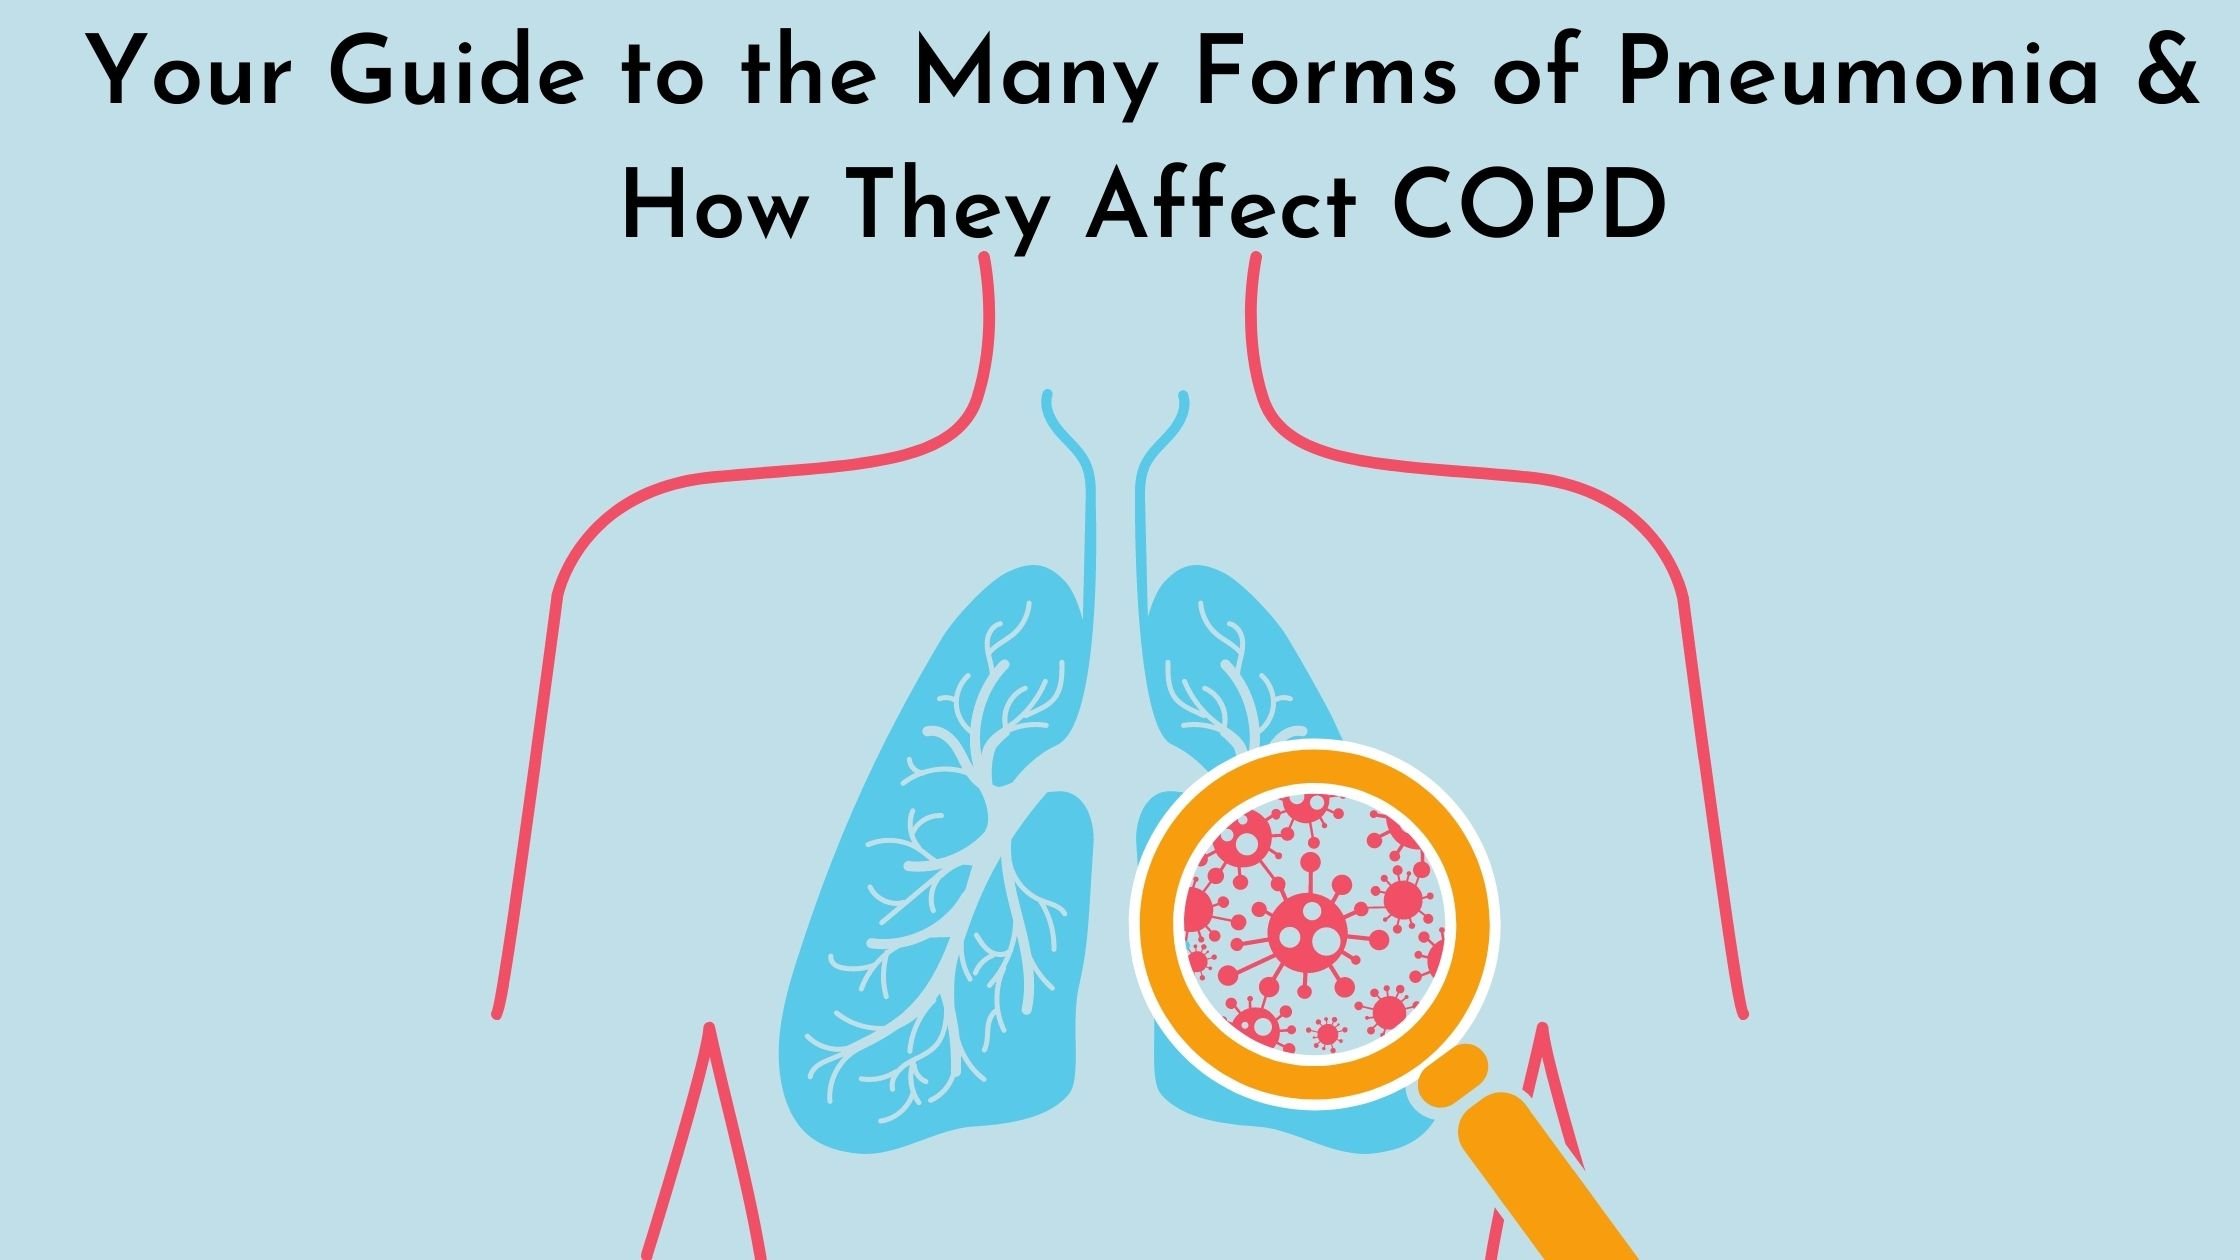 Your Guide to the Many Forms of Pneumonia & How They Affect COPD